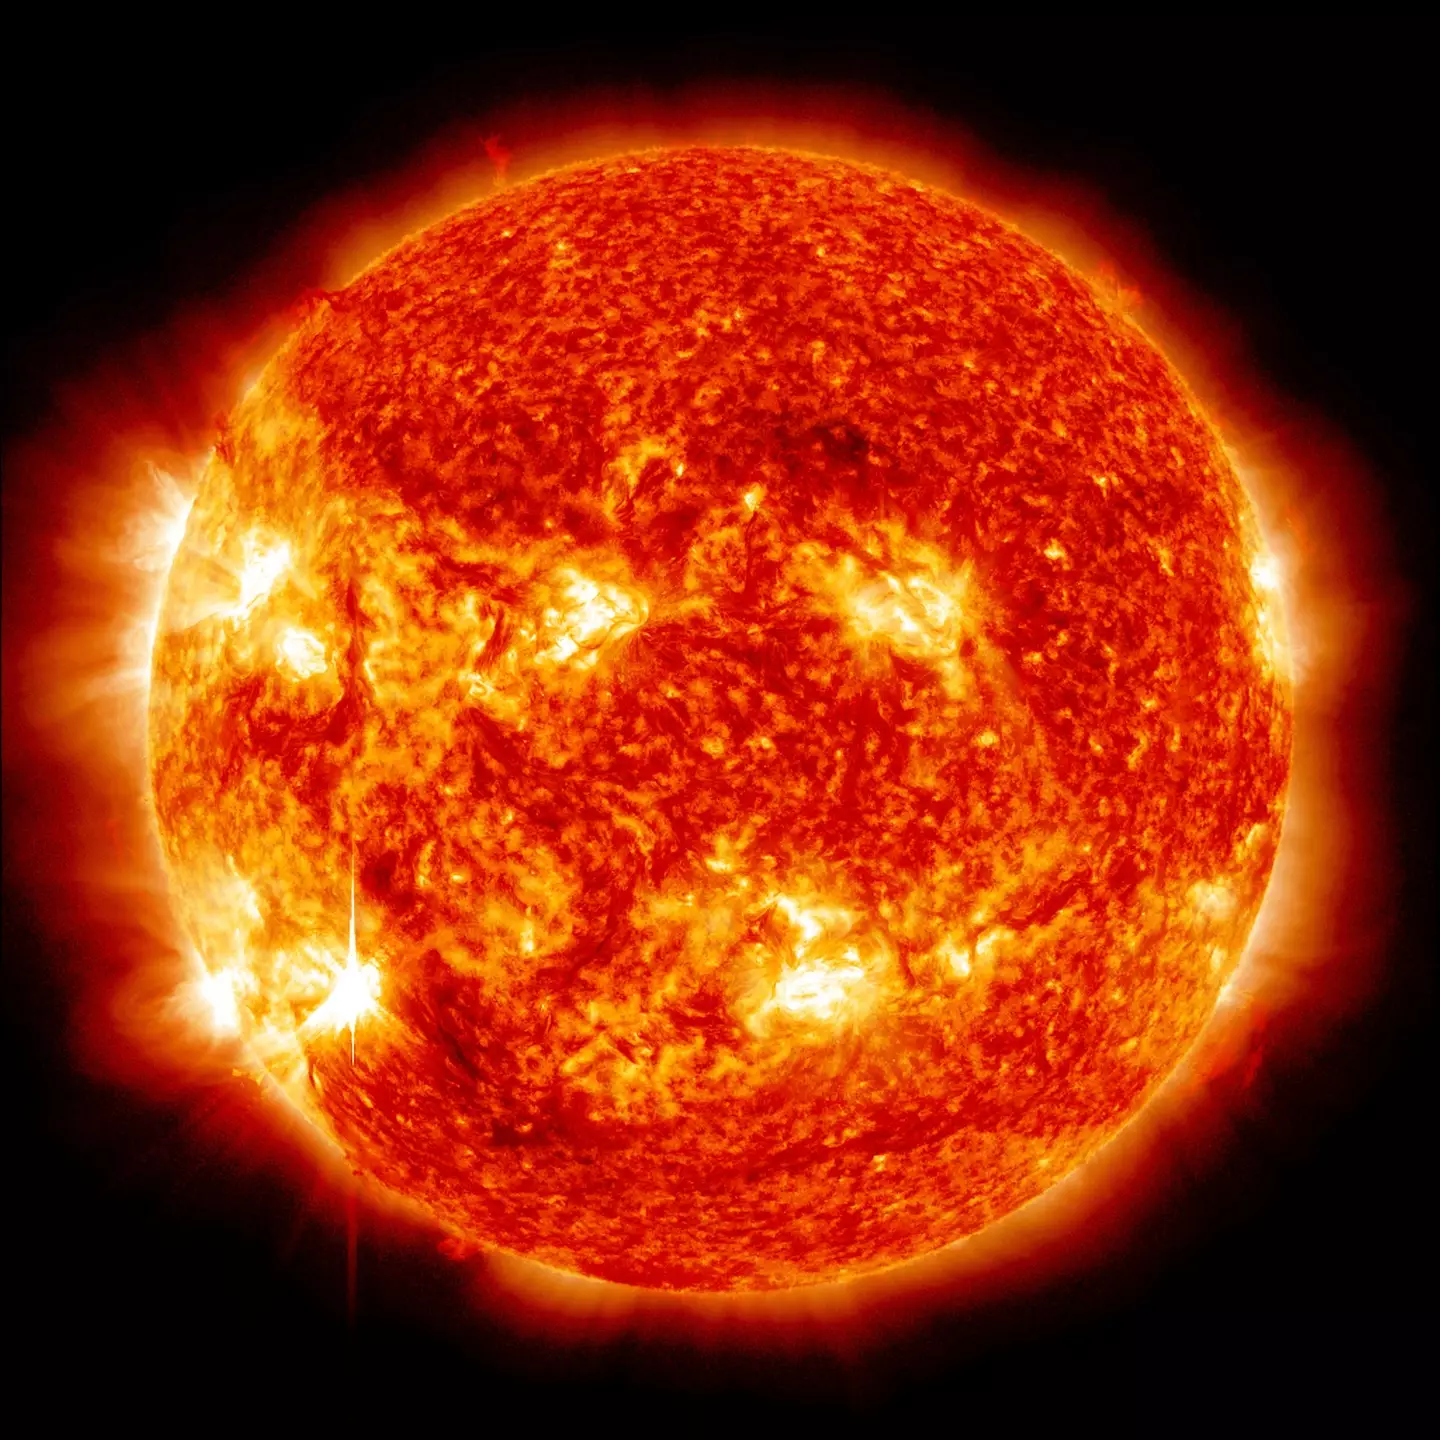 Scientists were able to ignite the same chemical reaction that powers the Sun.